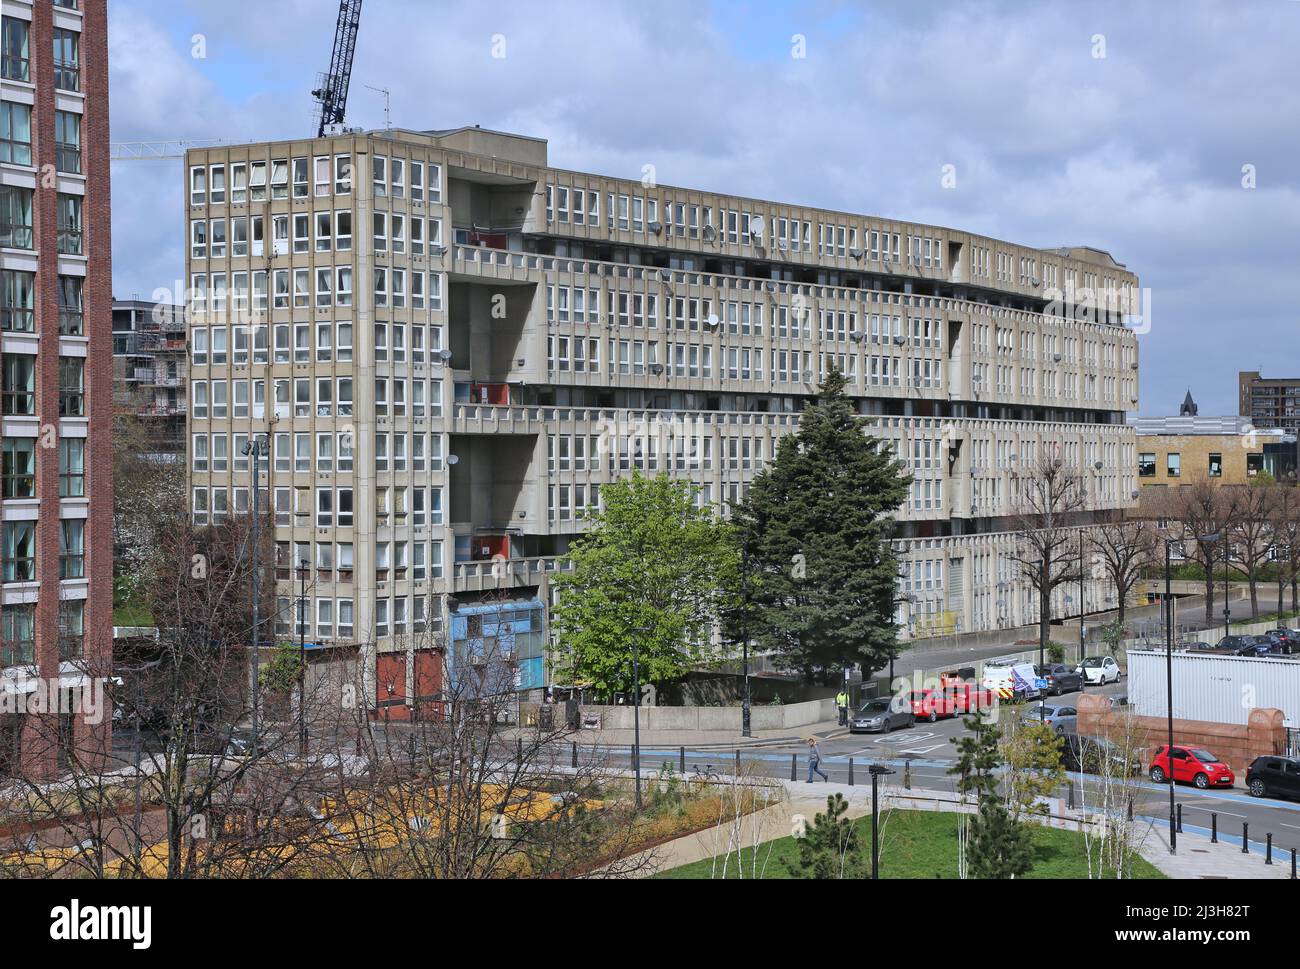 Robin Hood Gardens (East block), the famous 1960s brutalist housing development in east London, UK, by Alison & Peter Smithson. Soon to be demolished. Stock Photo